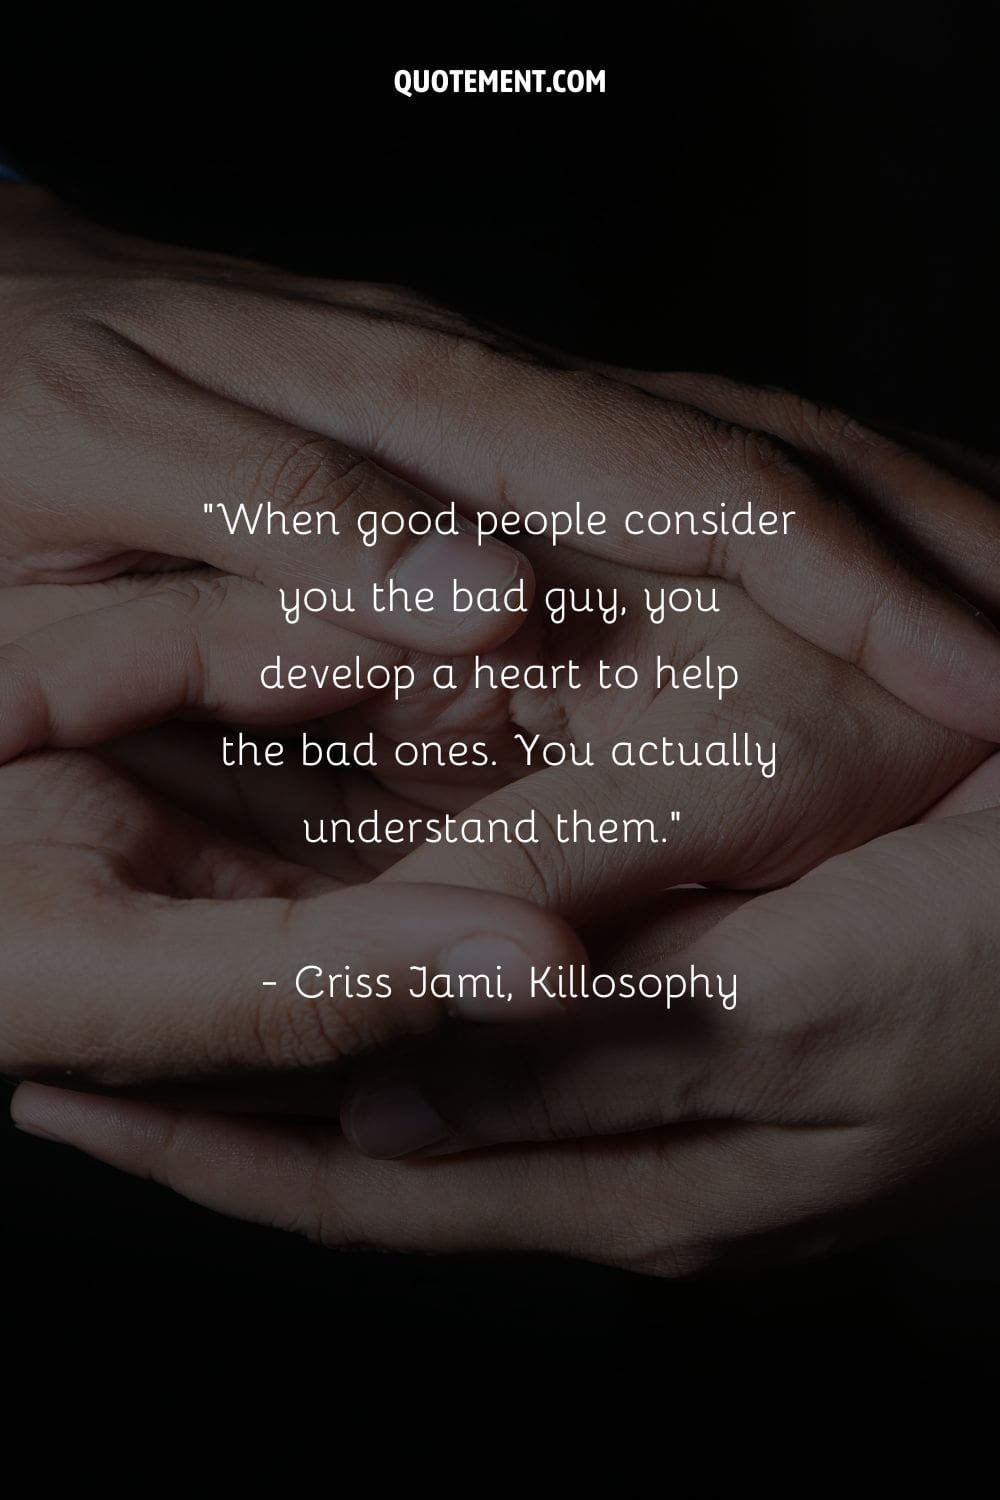 When good people consider you the bad guy, you develop a heart to help the bad ones. You actually understand them